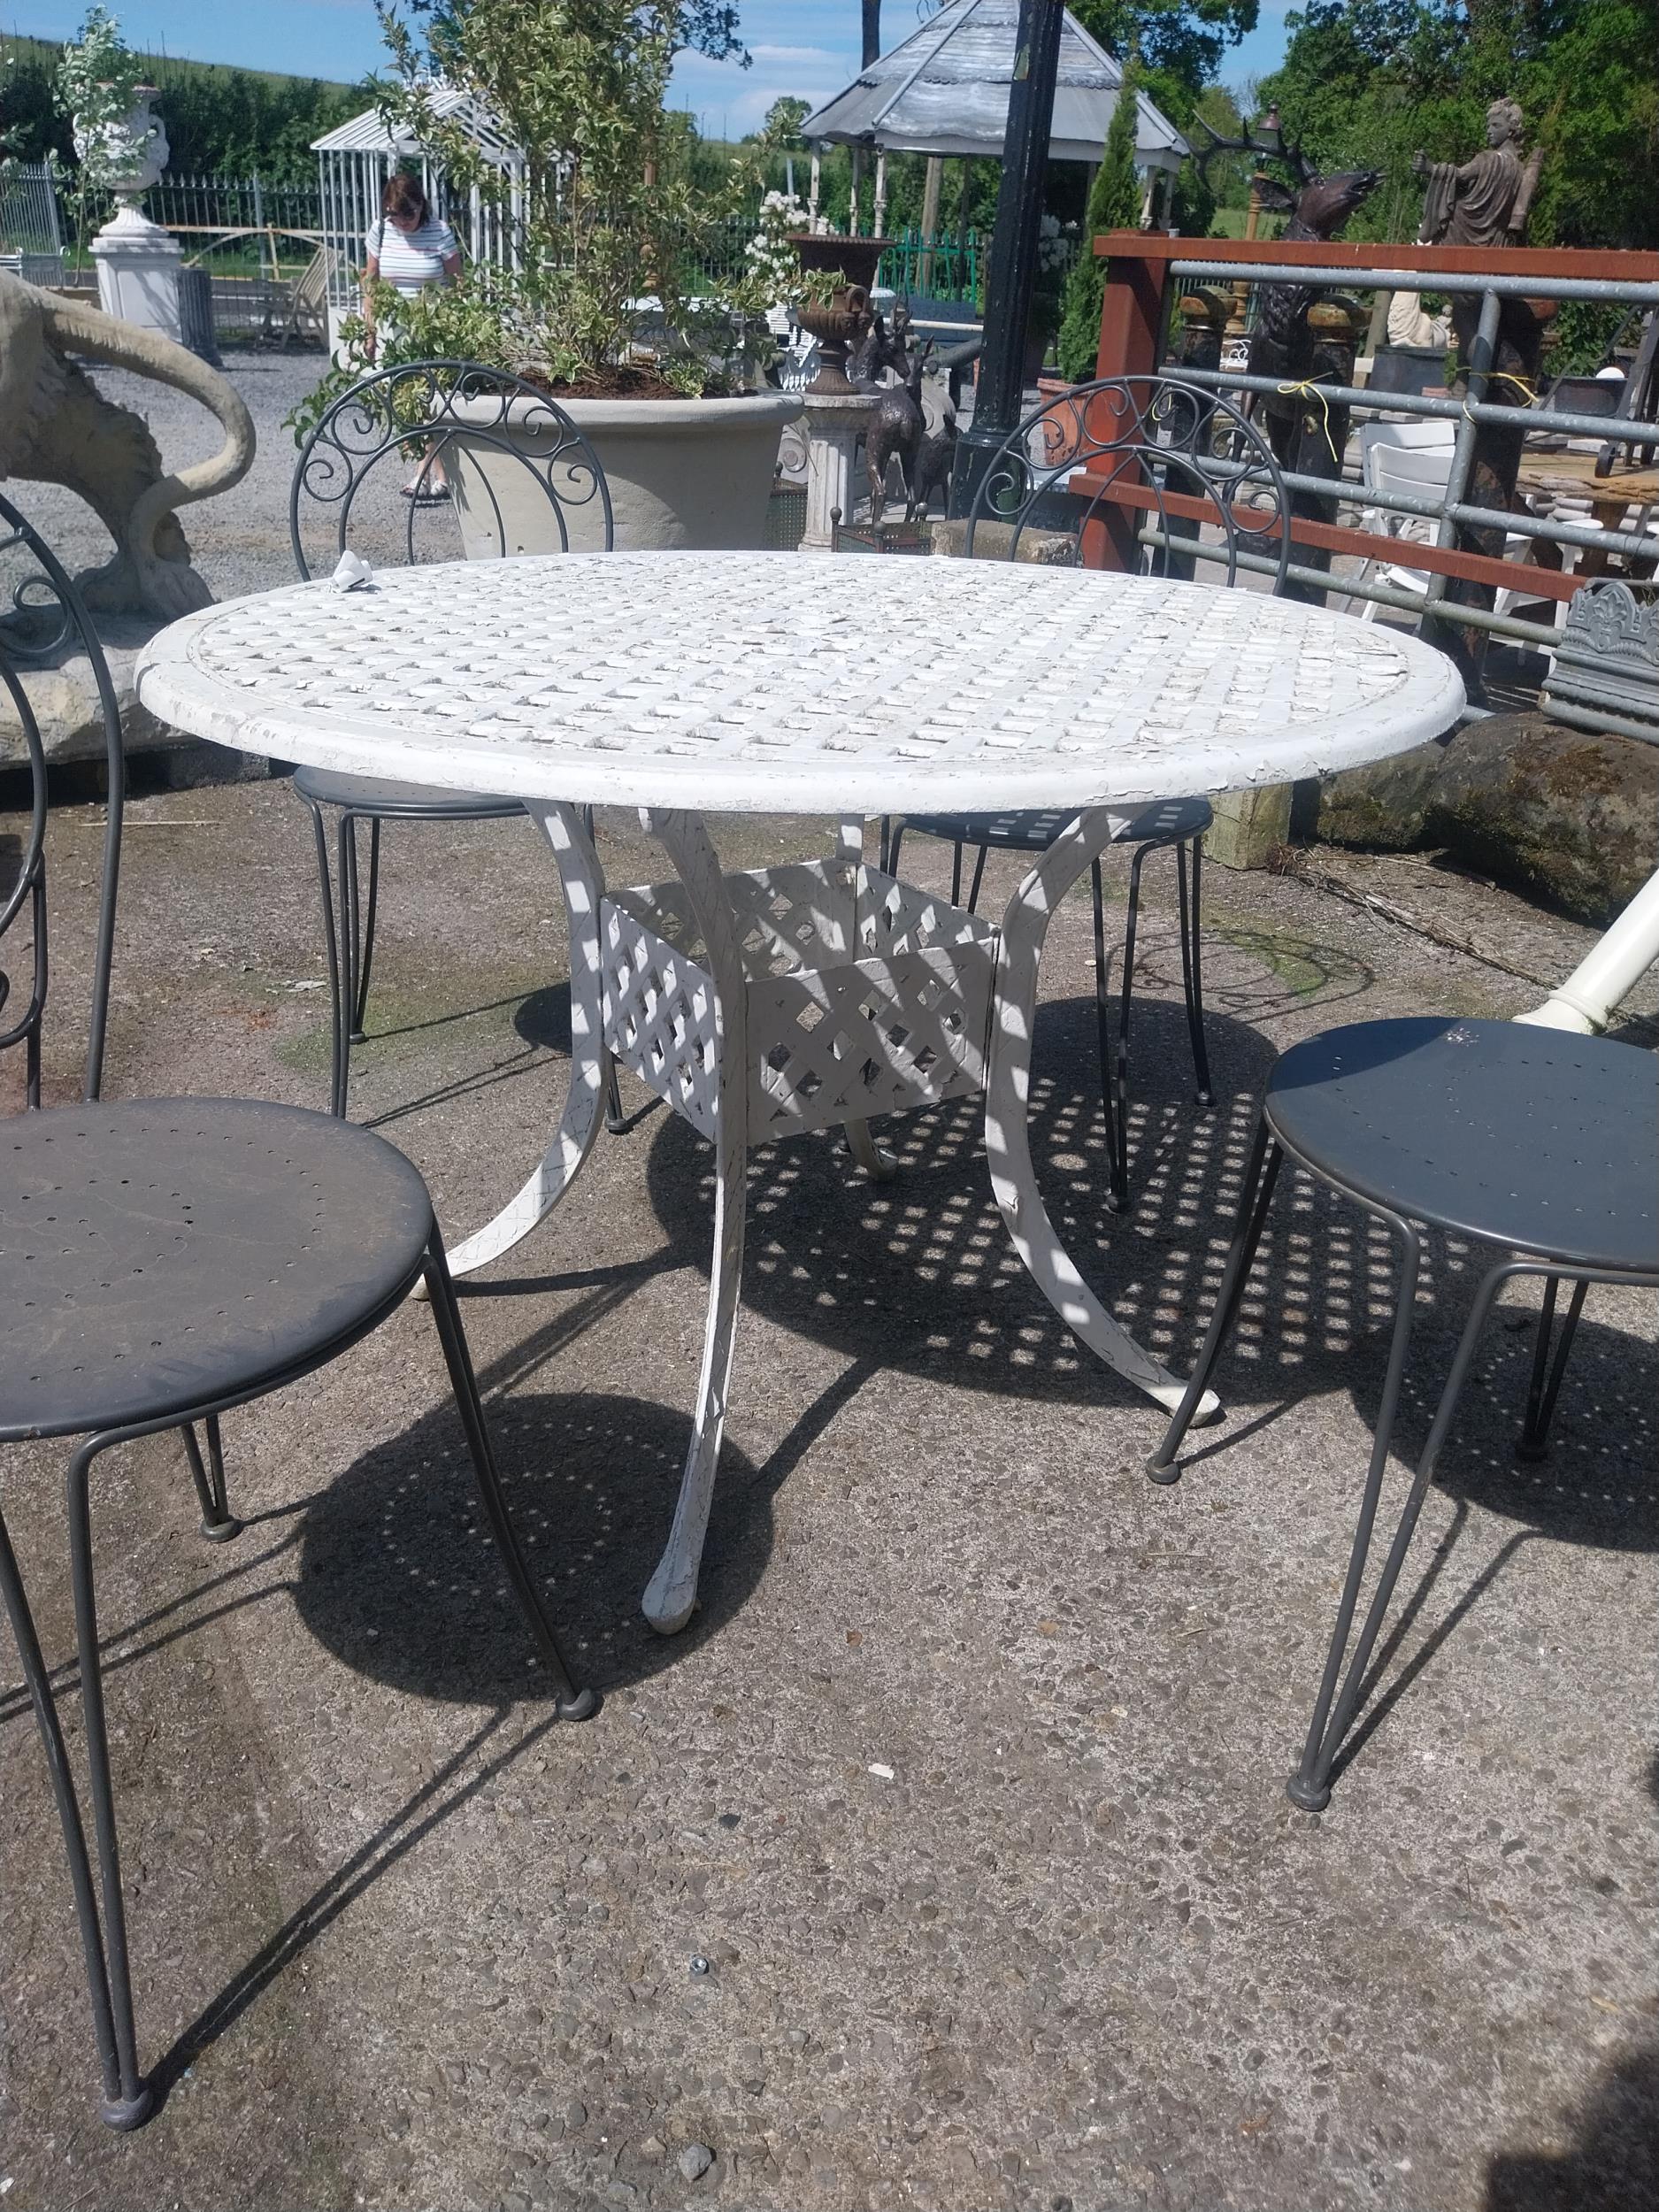 Cast iron aluminium garden table and four wrought iron garden chairs {Tbl. 73 cm H x 106 cm Dia. and - Image 2 of 4